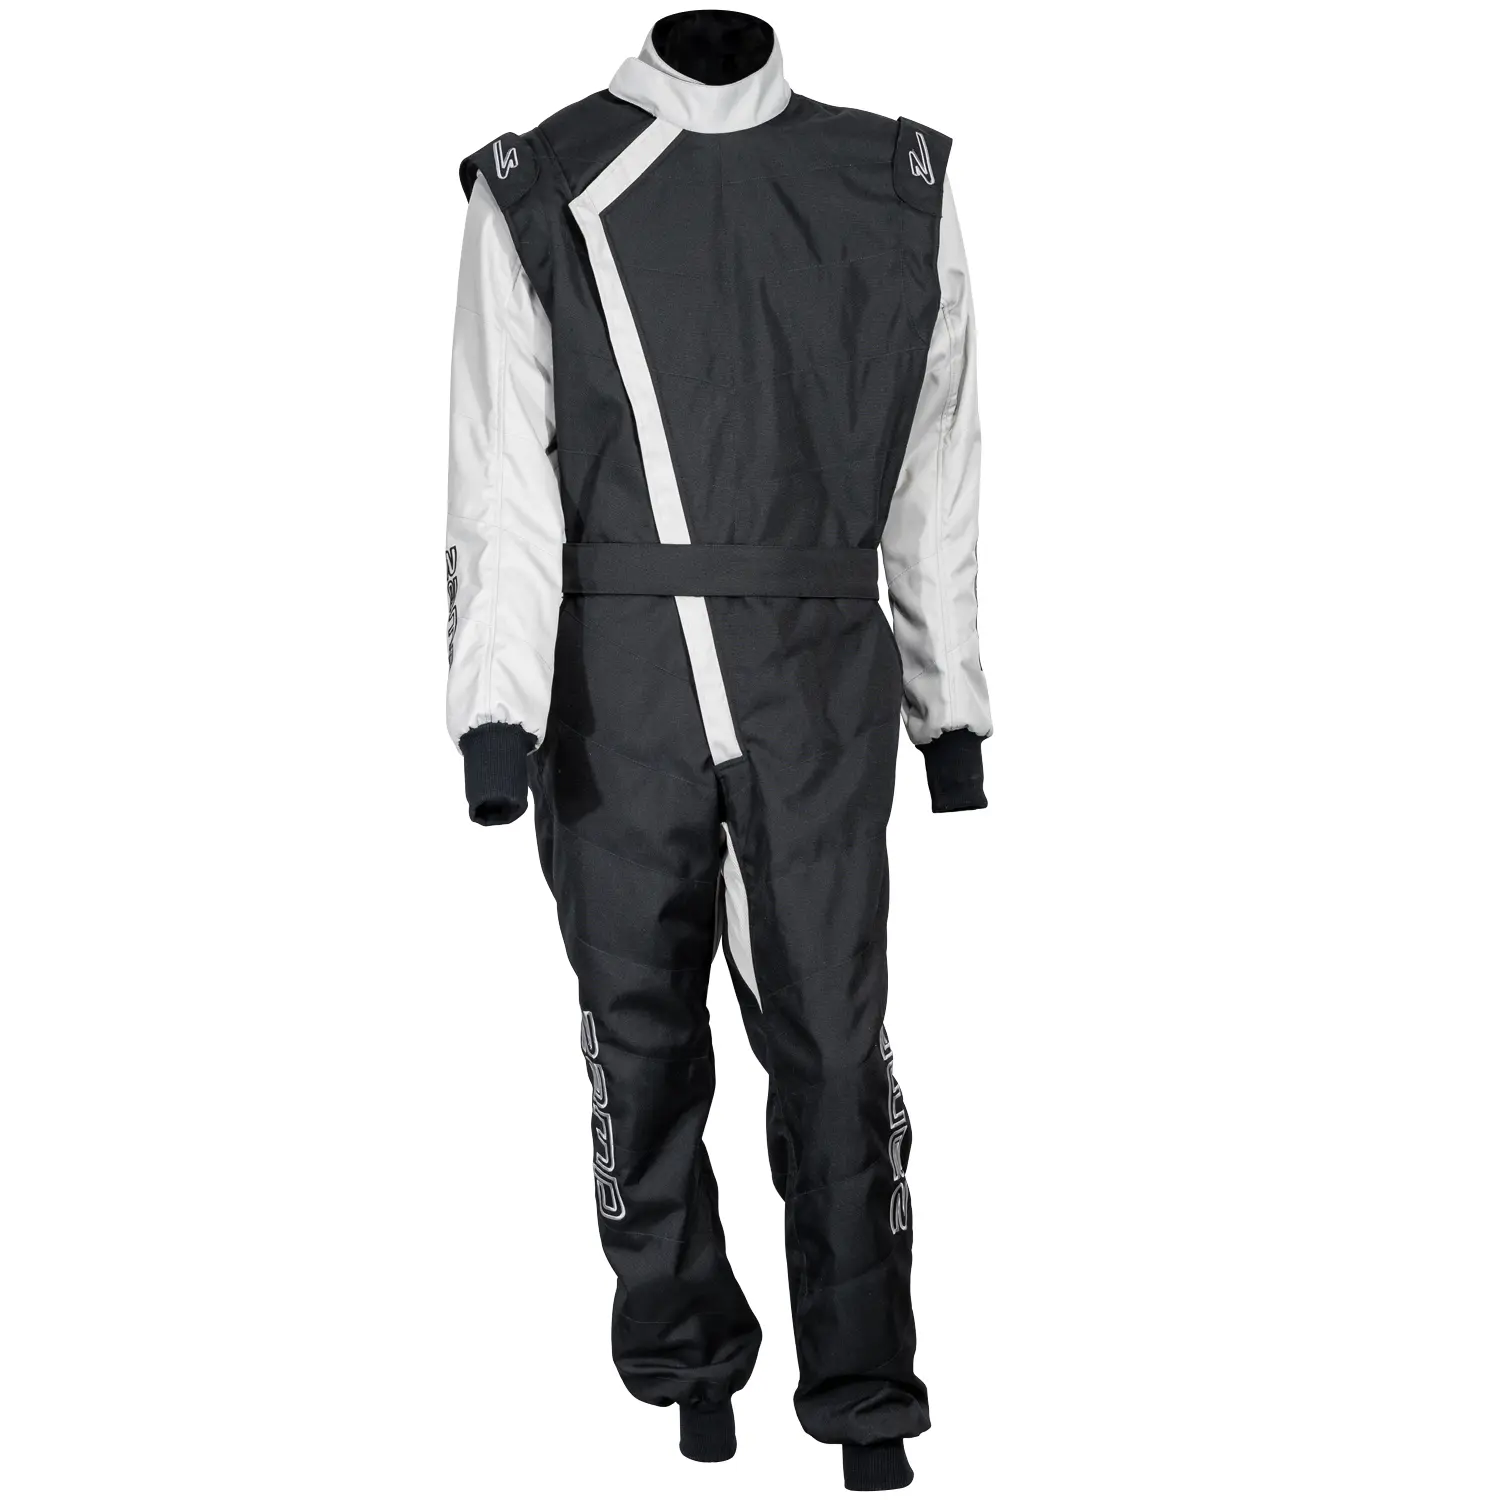 ZK-40 Kart Racing Youth Suit